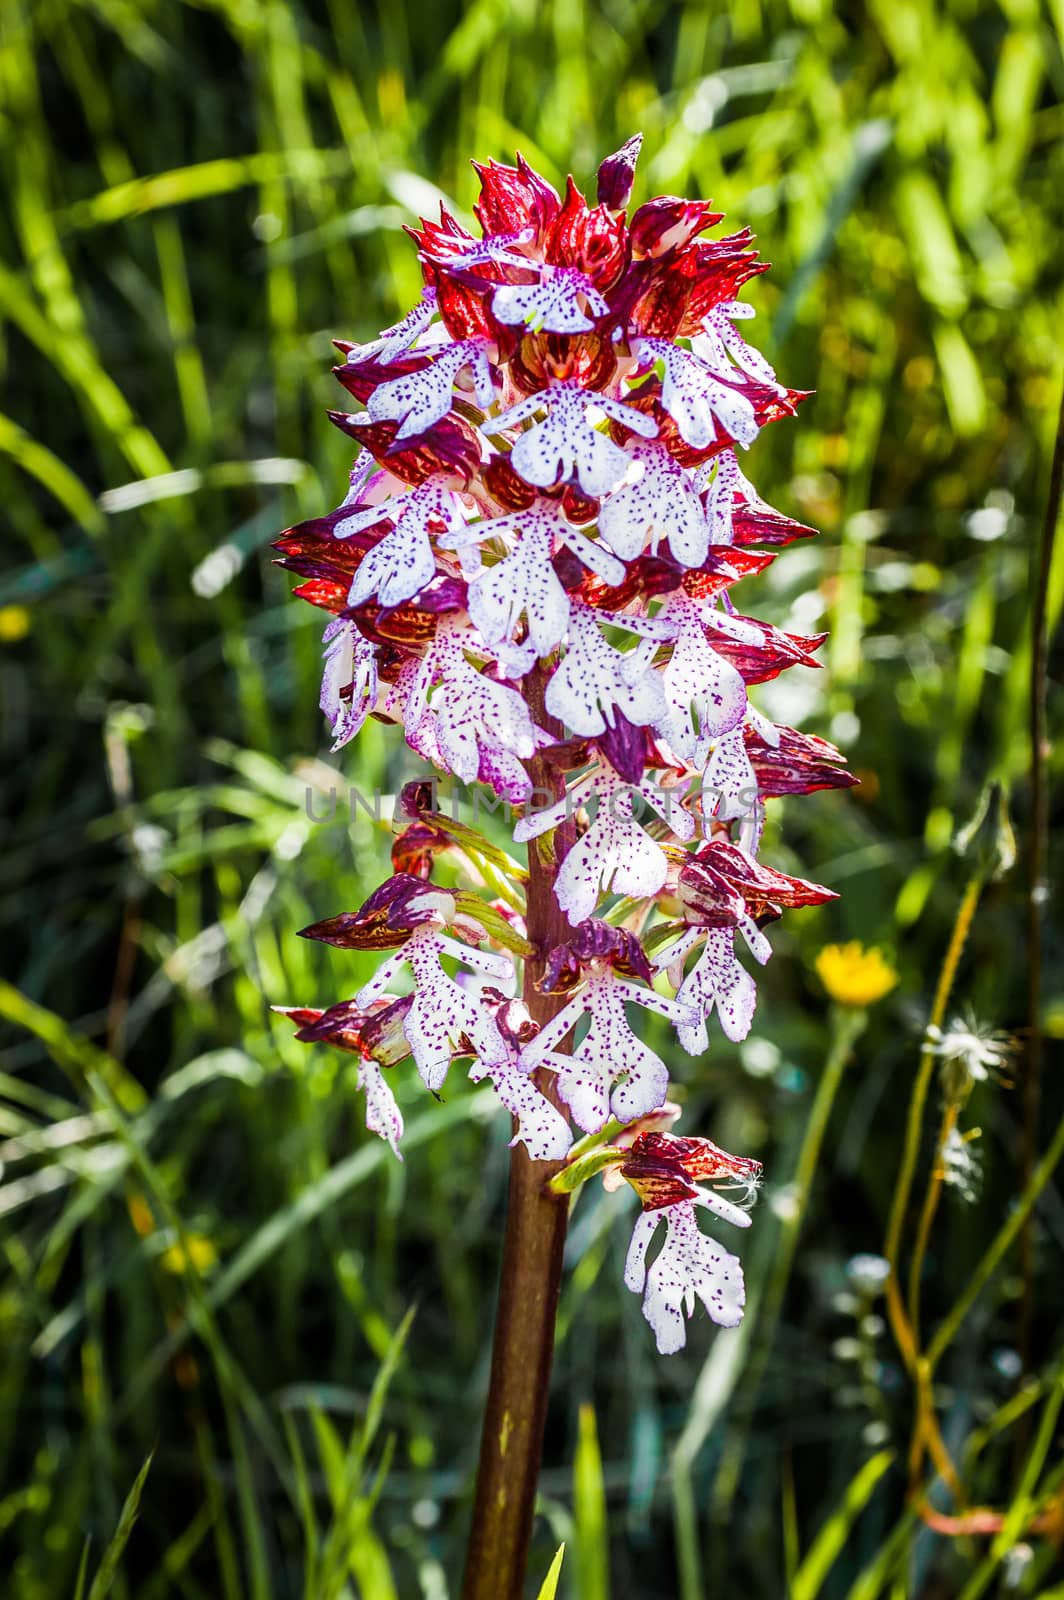 Red and white Early Marsh Orchid in a meadow in the Italian country side